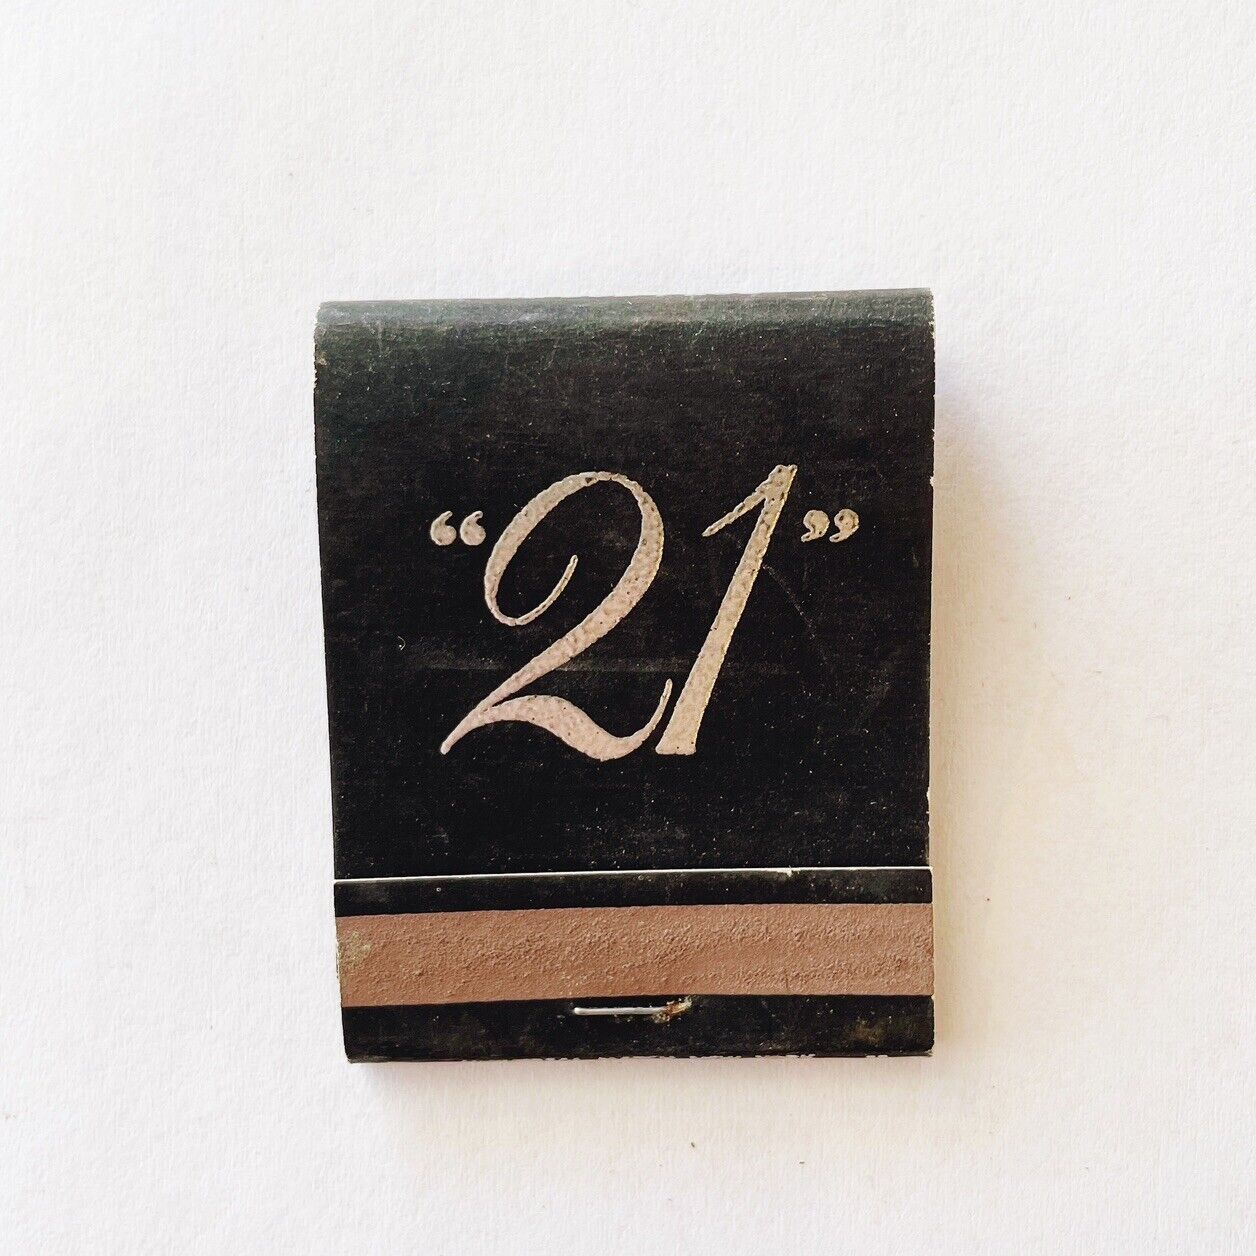 Vintage Black 21 Club New York City NYC Advertising Collectible Matchbook